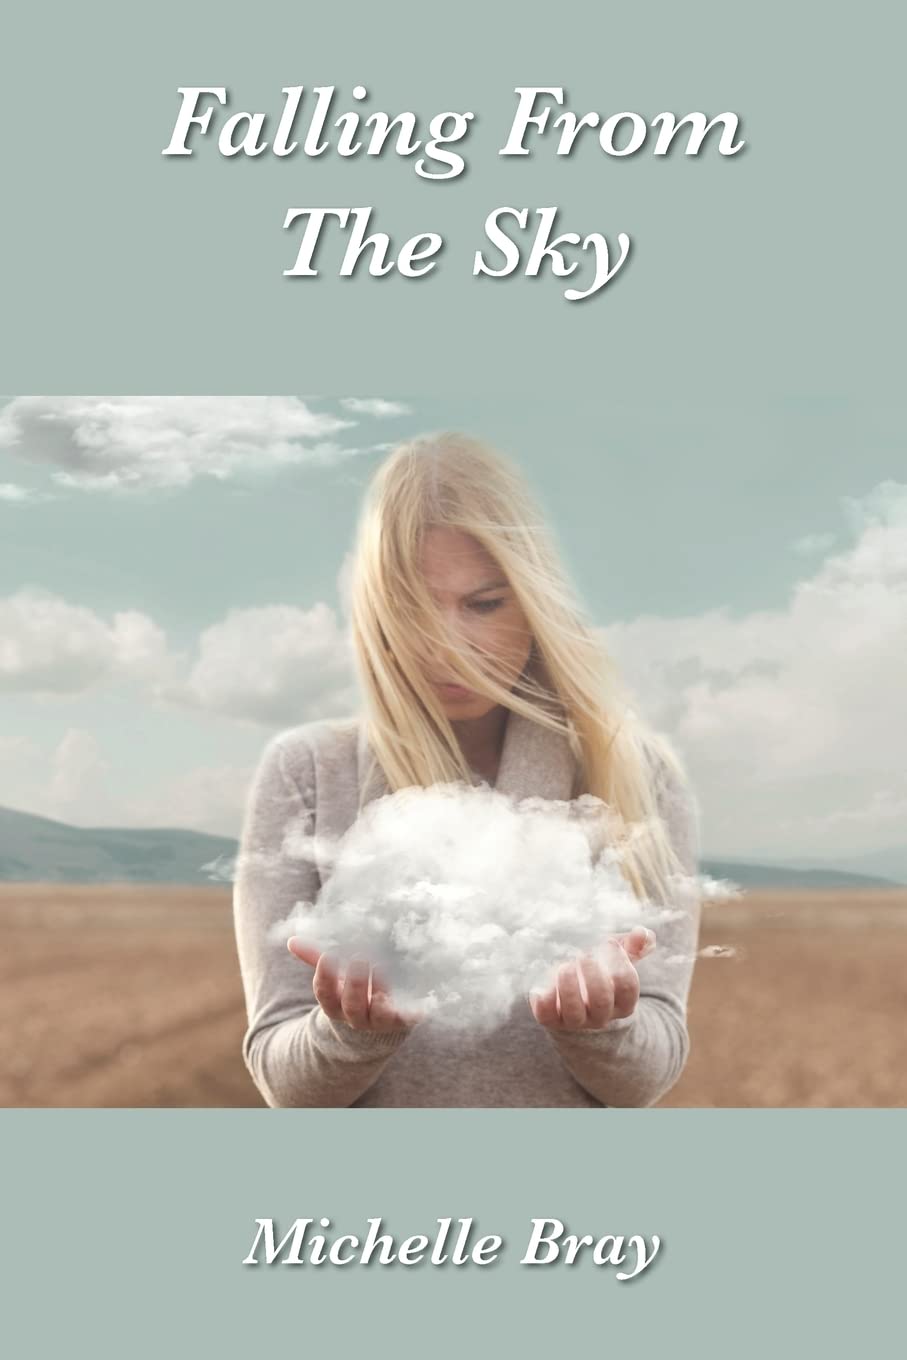 Falling From The Sky by Michelle Bray